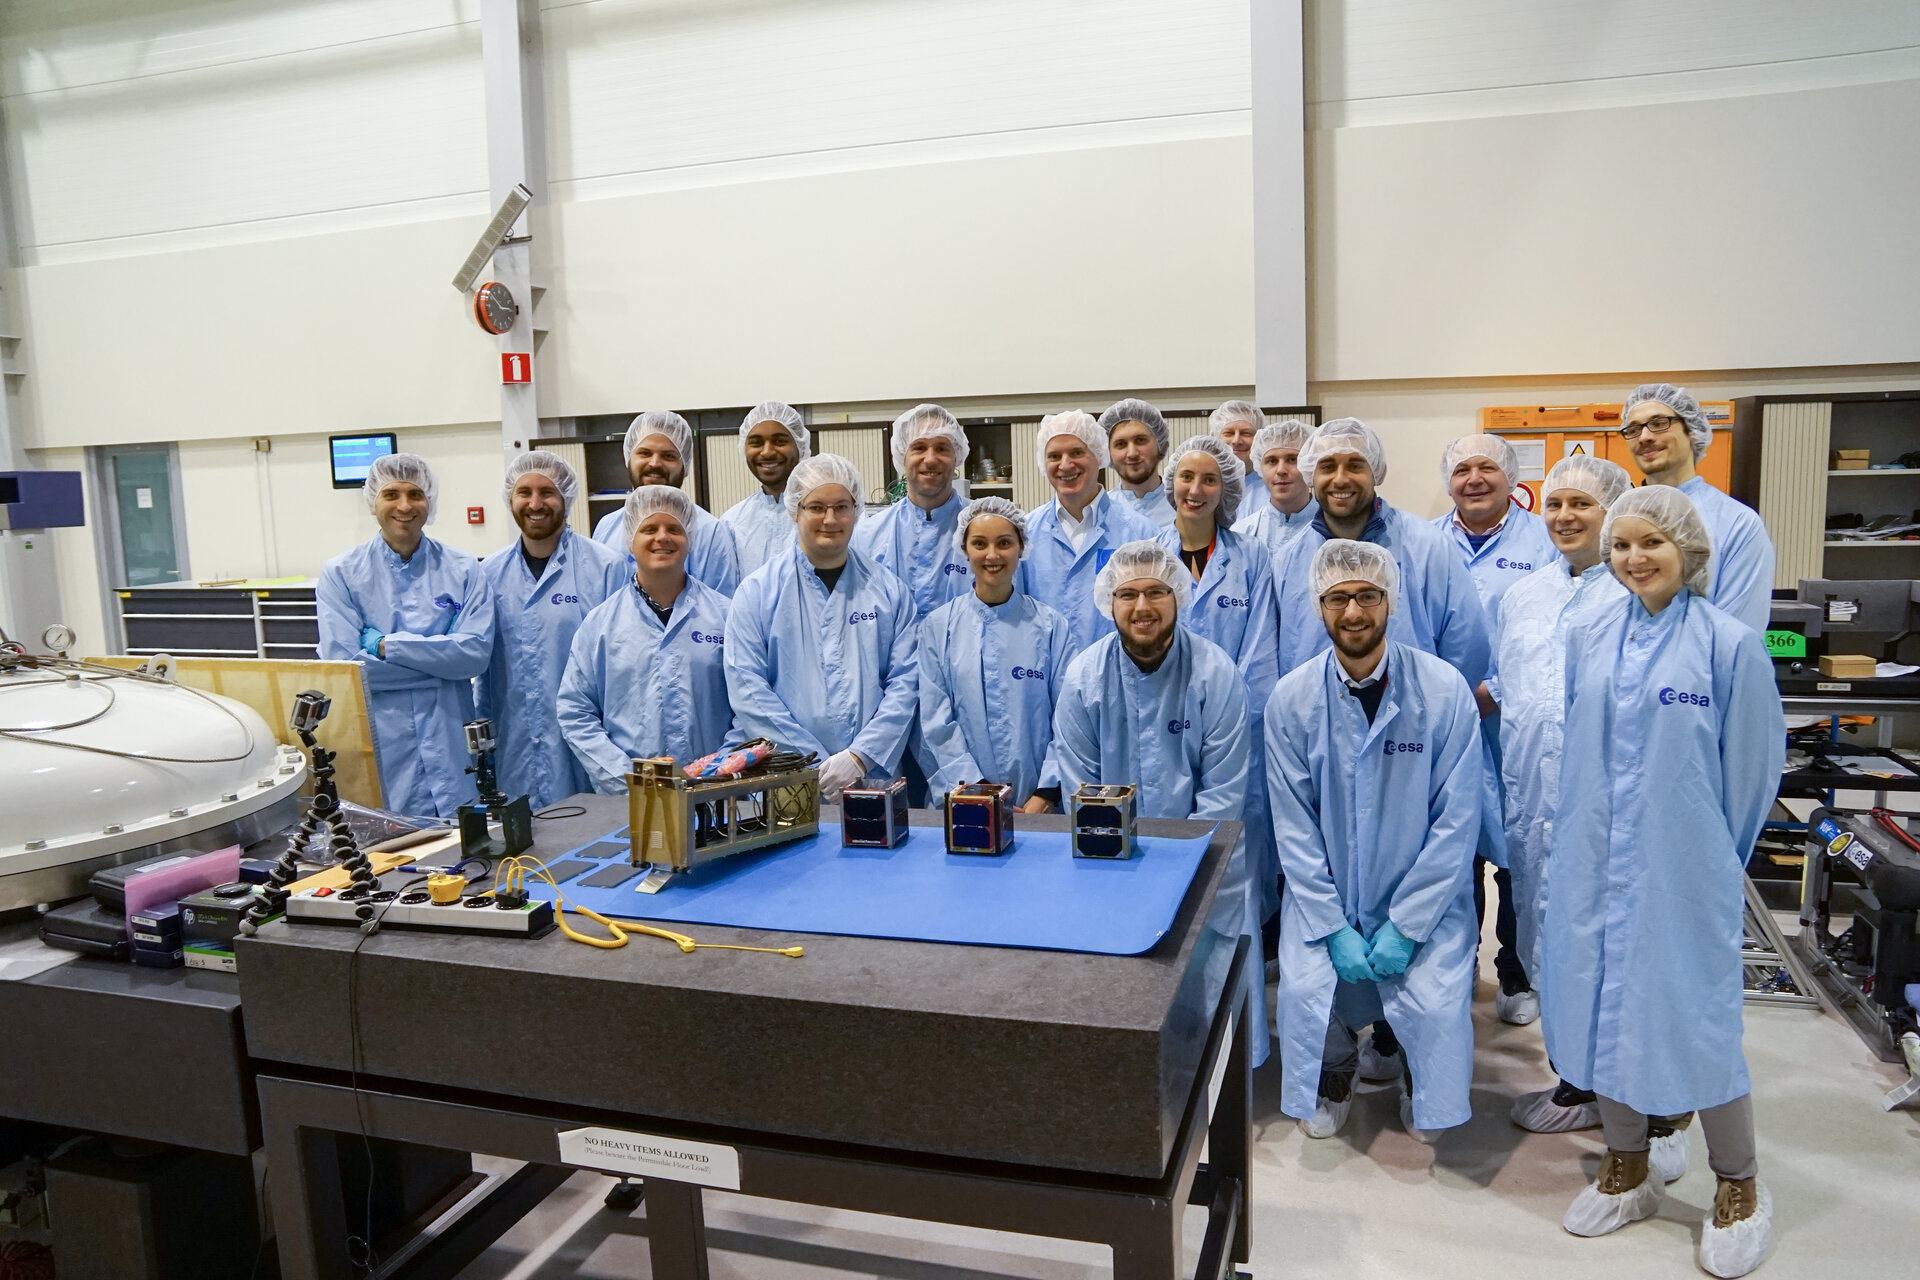 Happy faces - FYS! 2016 CubeSat teams ready for integration!